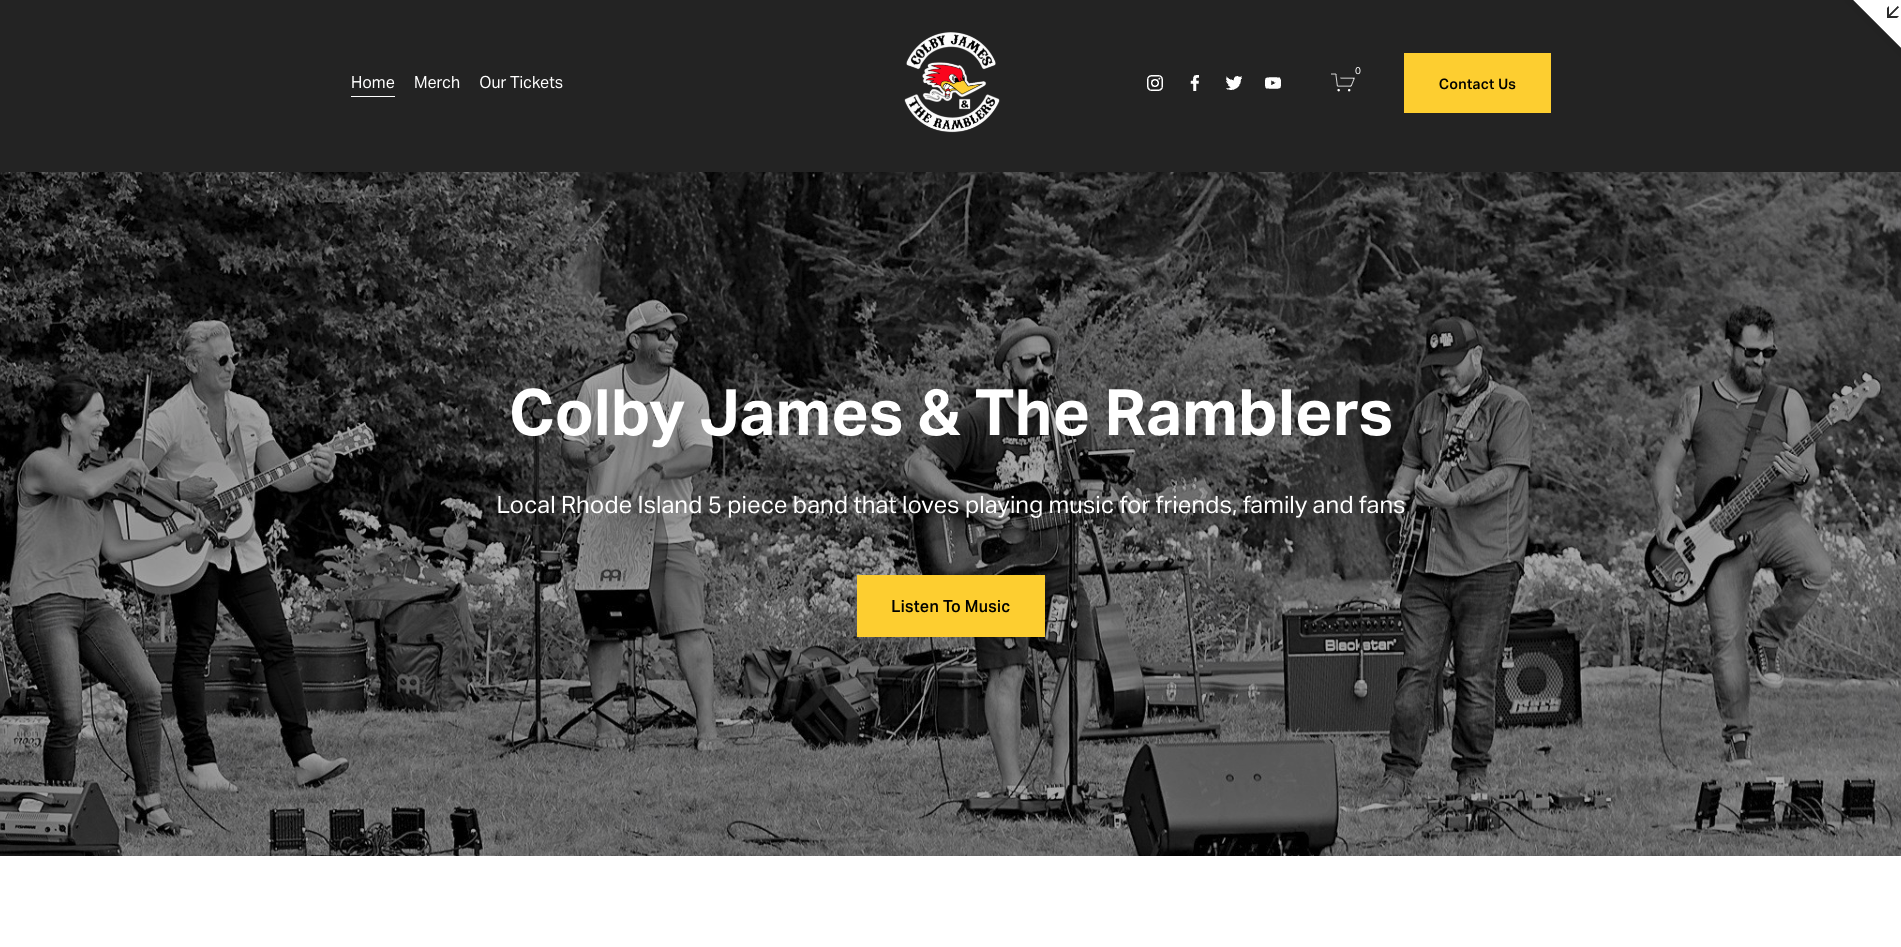 Colby-james-and-the-ramblers-website.jpg